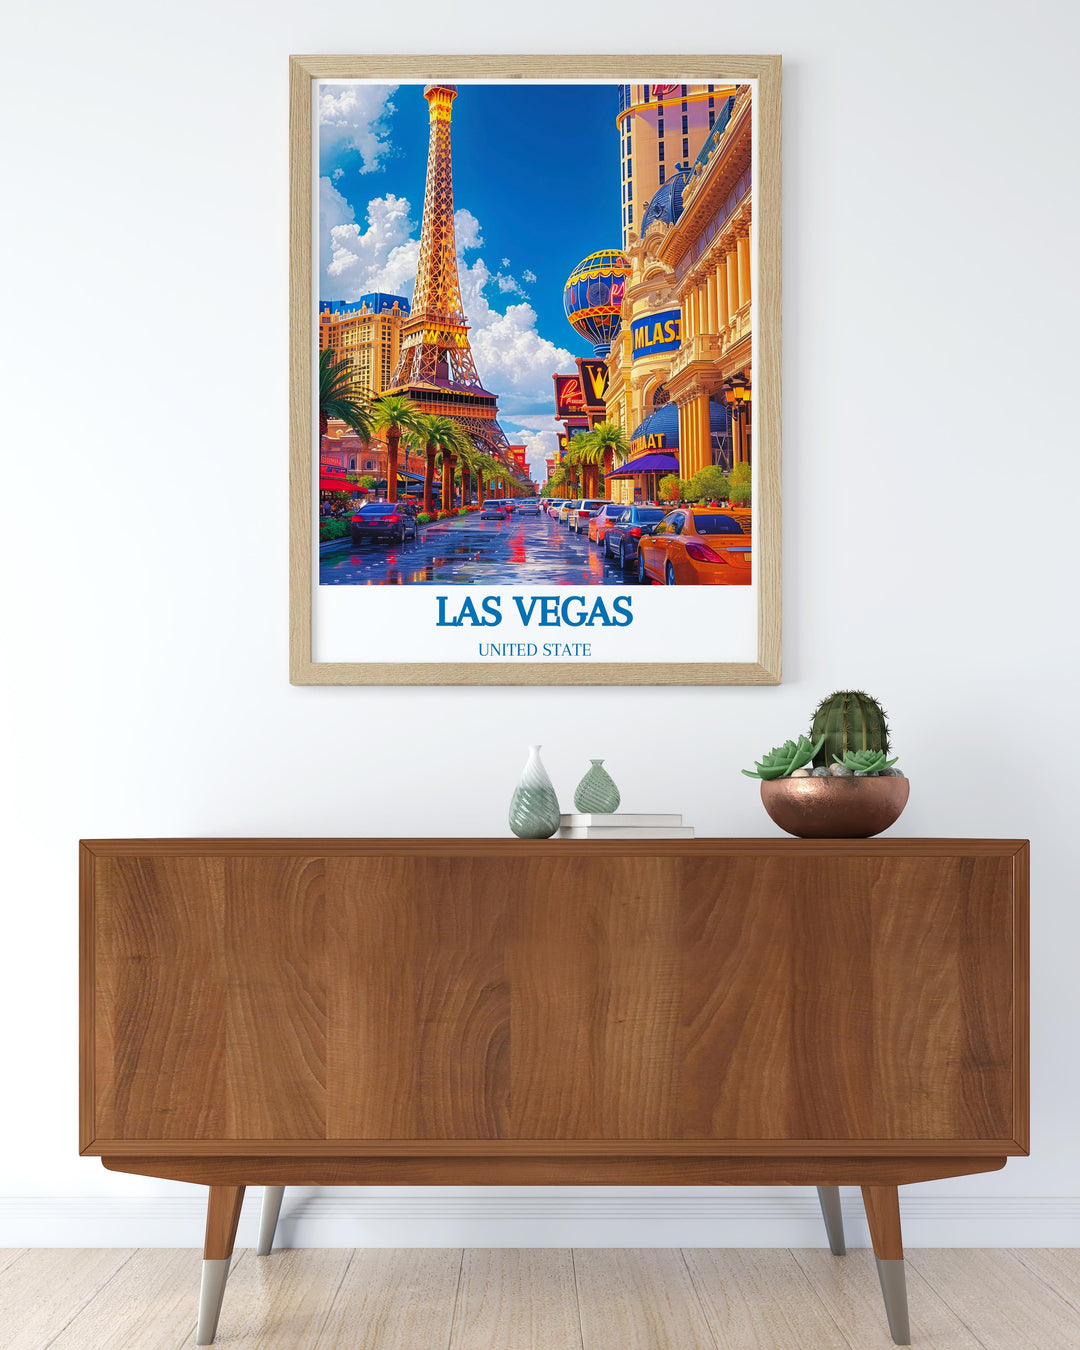 United States travel poster capturing the essence of Las Vegas, perfect for decorating a travel lovers home or office.